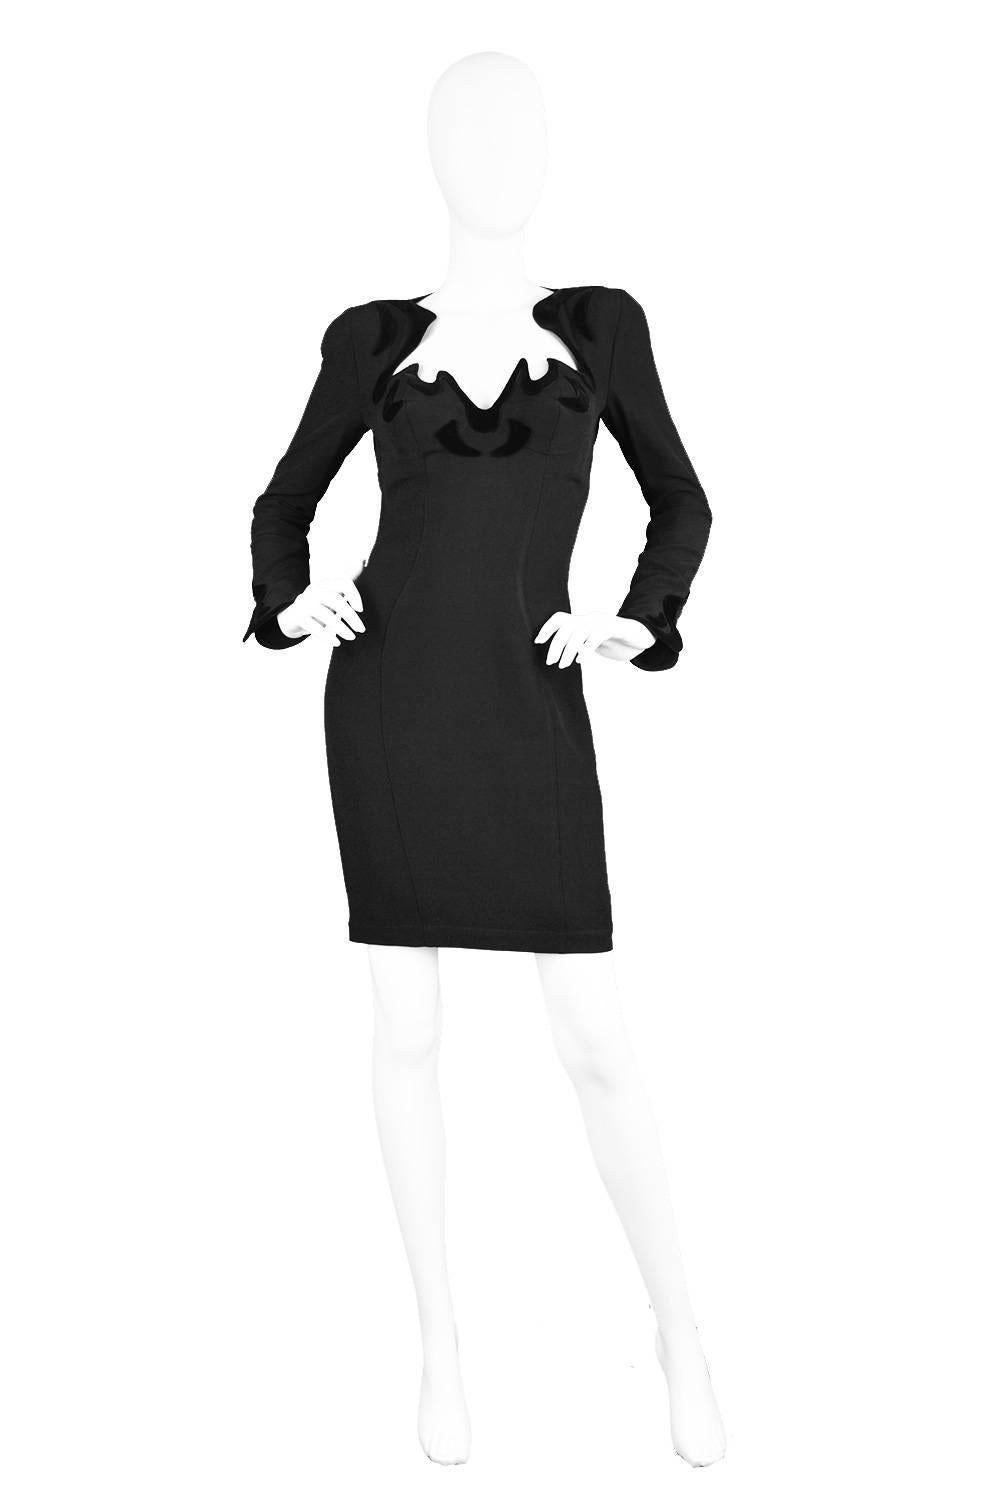 A stunning vintage Thierry Mugler dress  from the early 90s in a light crepe fabric with a flocked velvet around the cuffs and the sexy, dramatic neckline - which is supported by a built in bra. The shoulder pads give an edgy look, with loads of sex